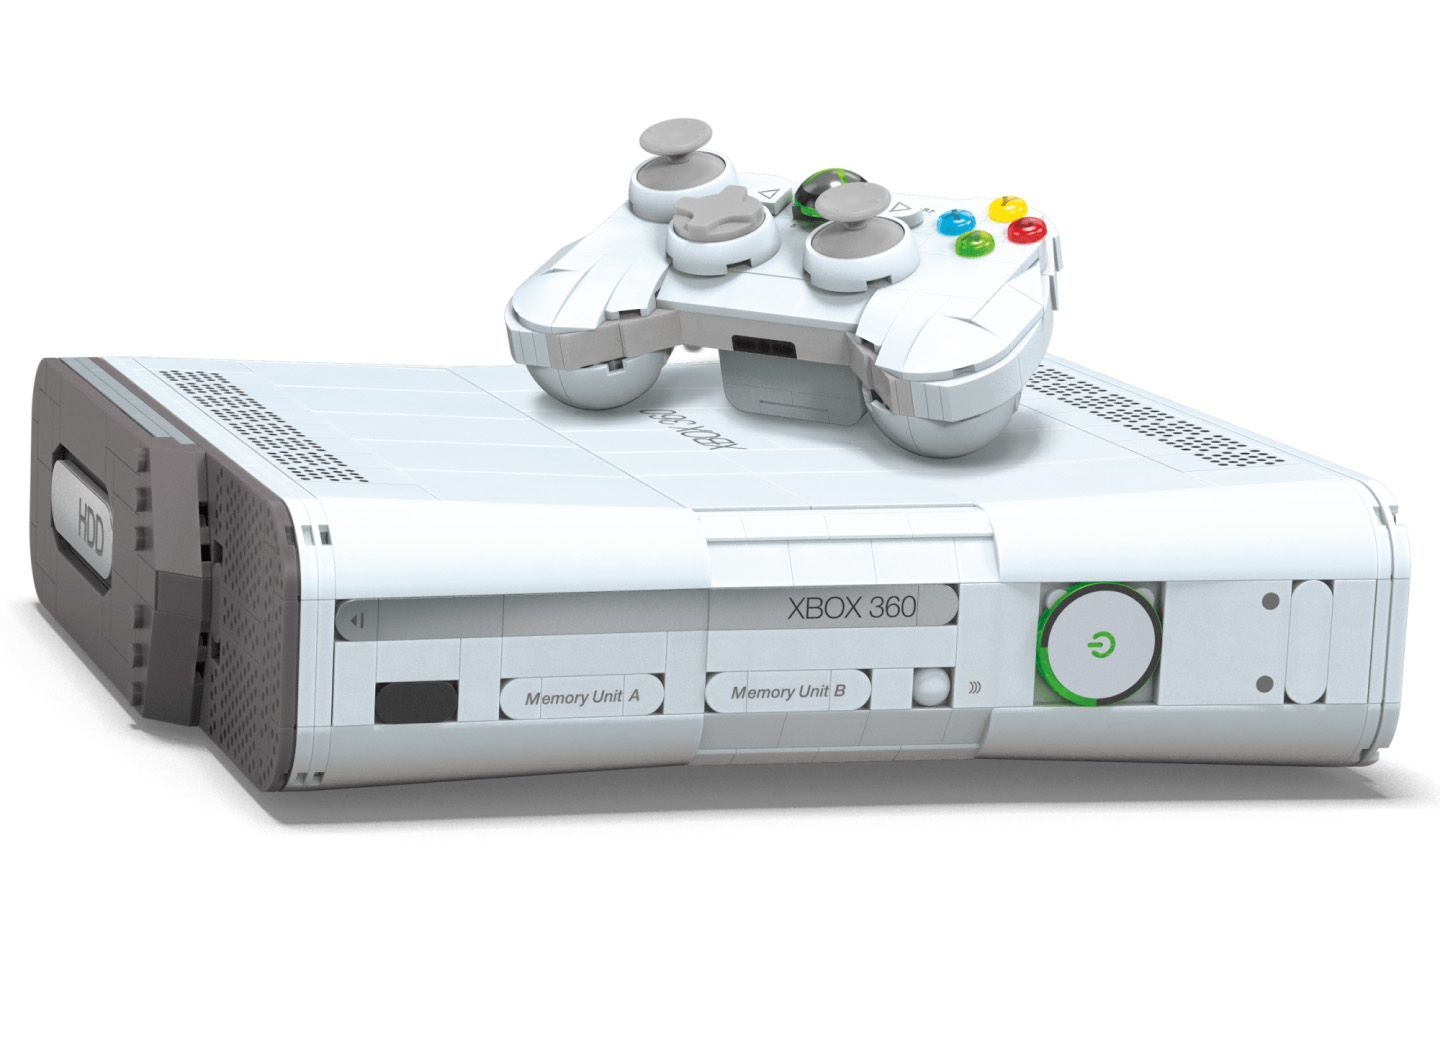 Build your own Xbox 360 from bricks - no not those ones